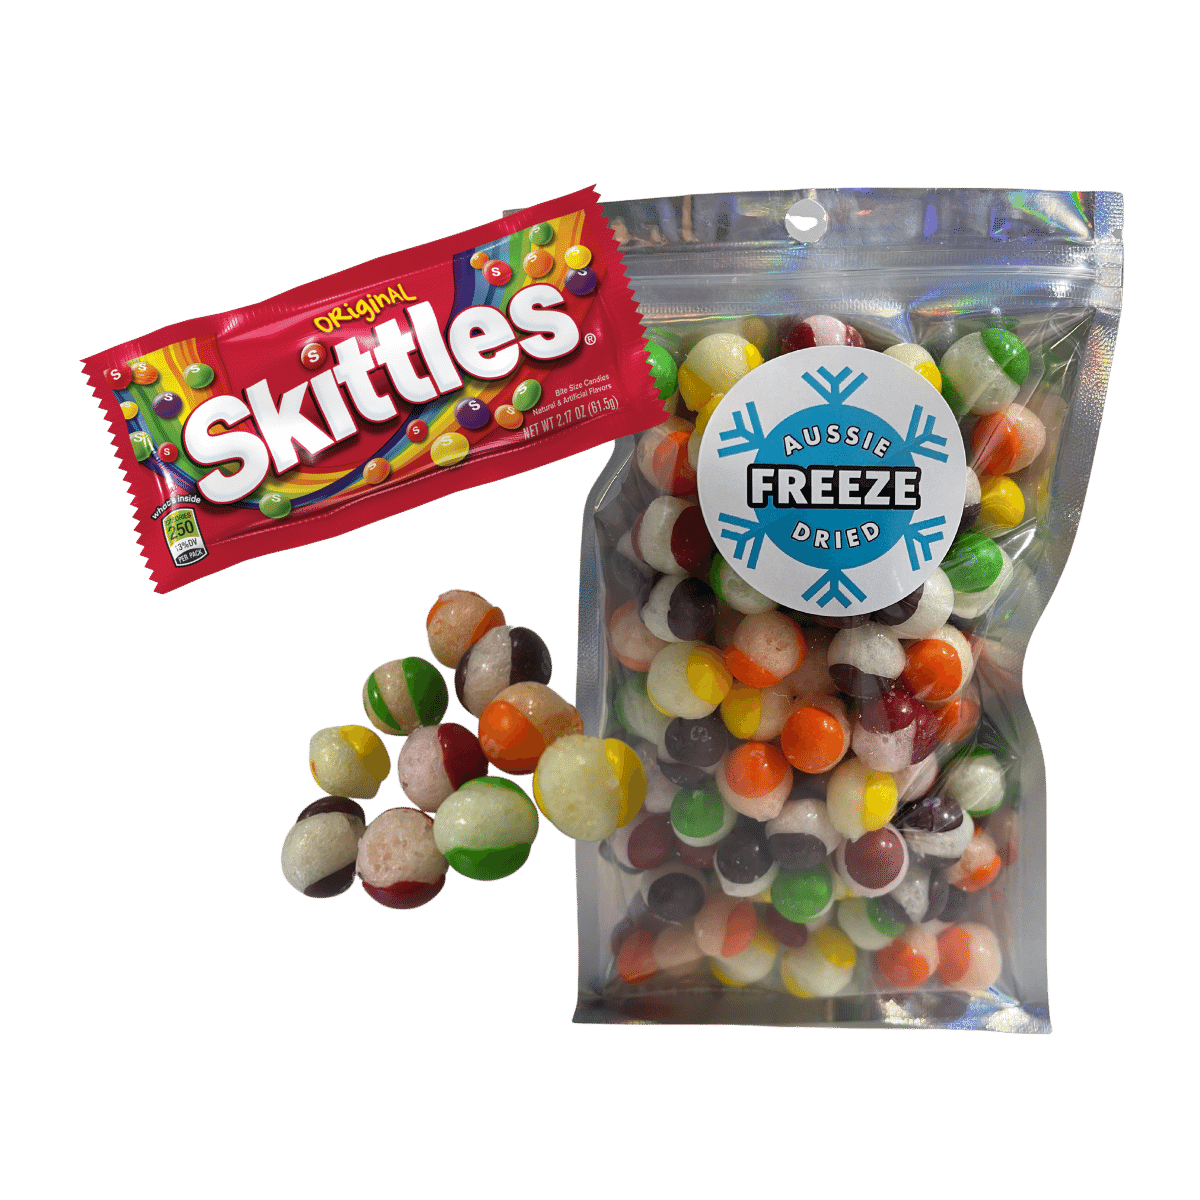 https://aussiefreezedried.com.au/wp-content/uploads/2022/06/freeze-dried-skittles.png